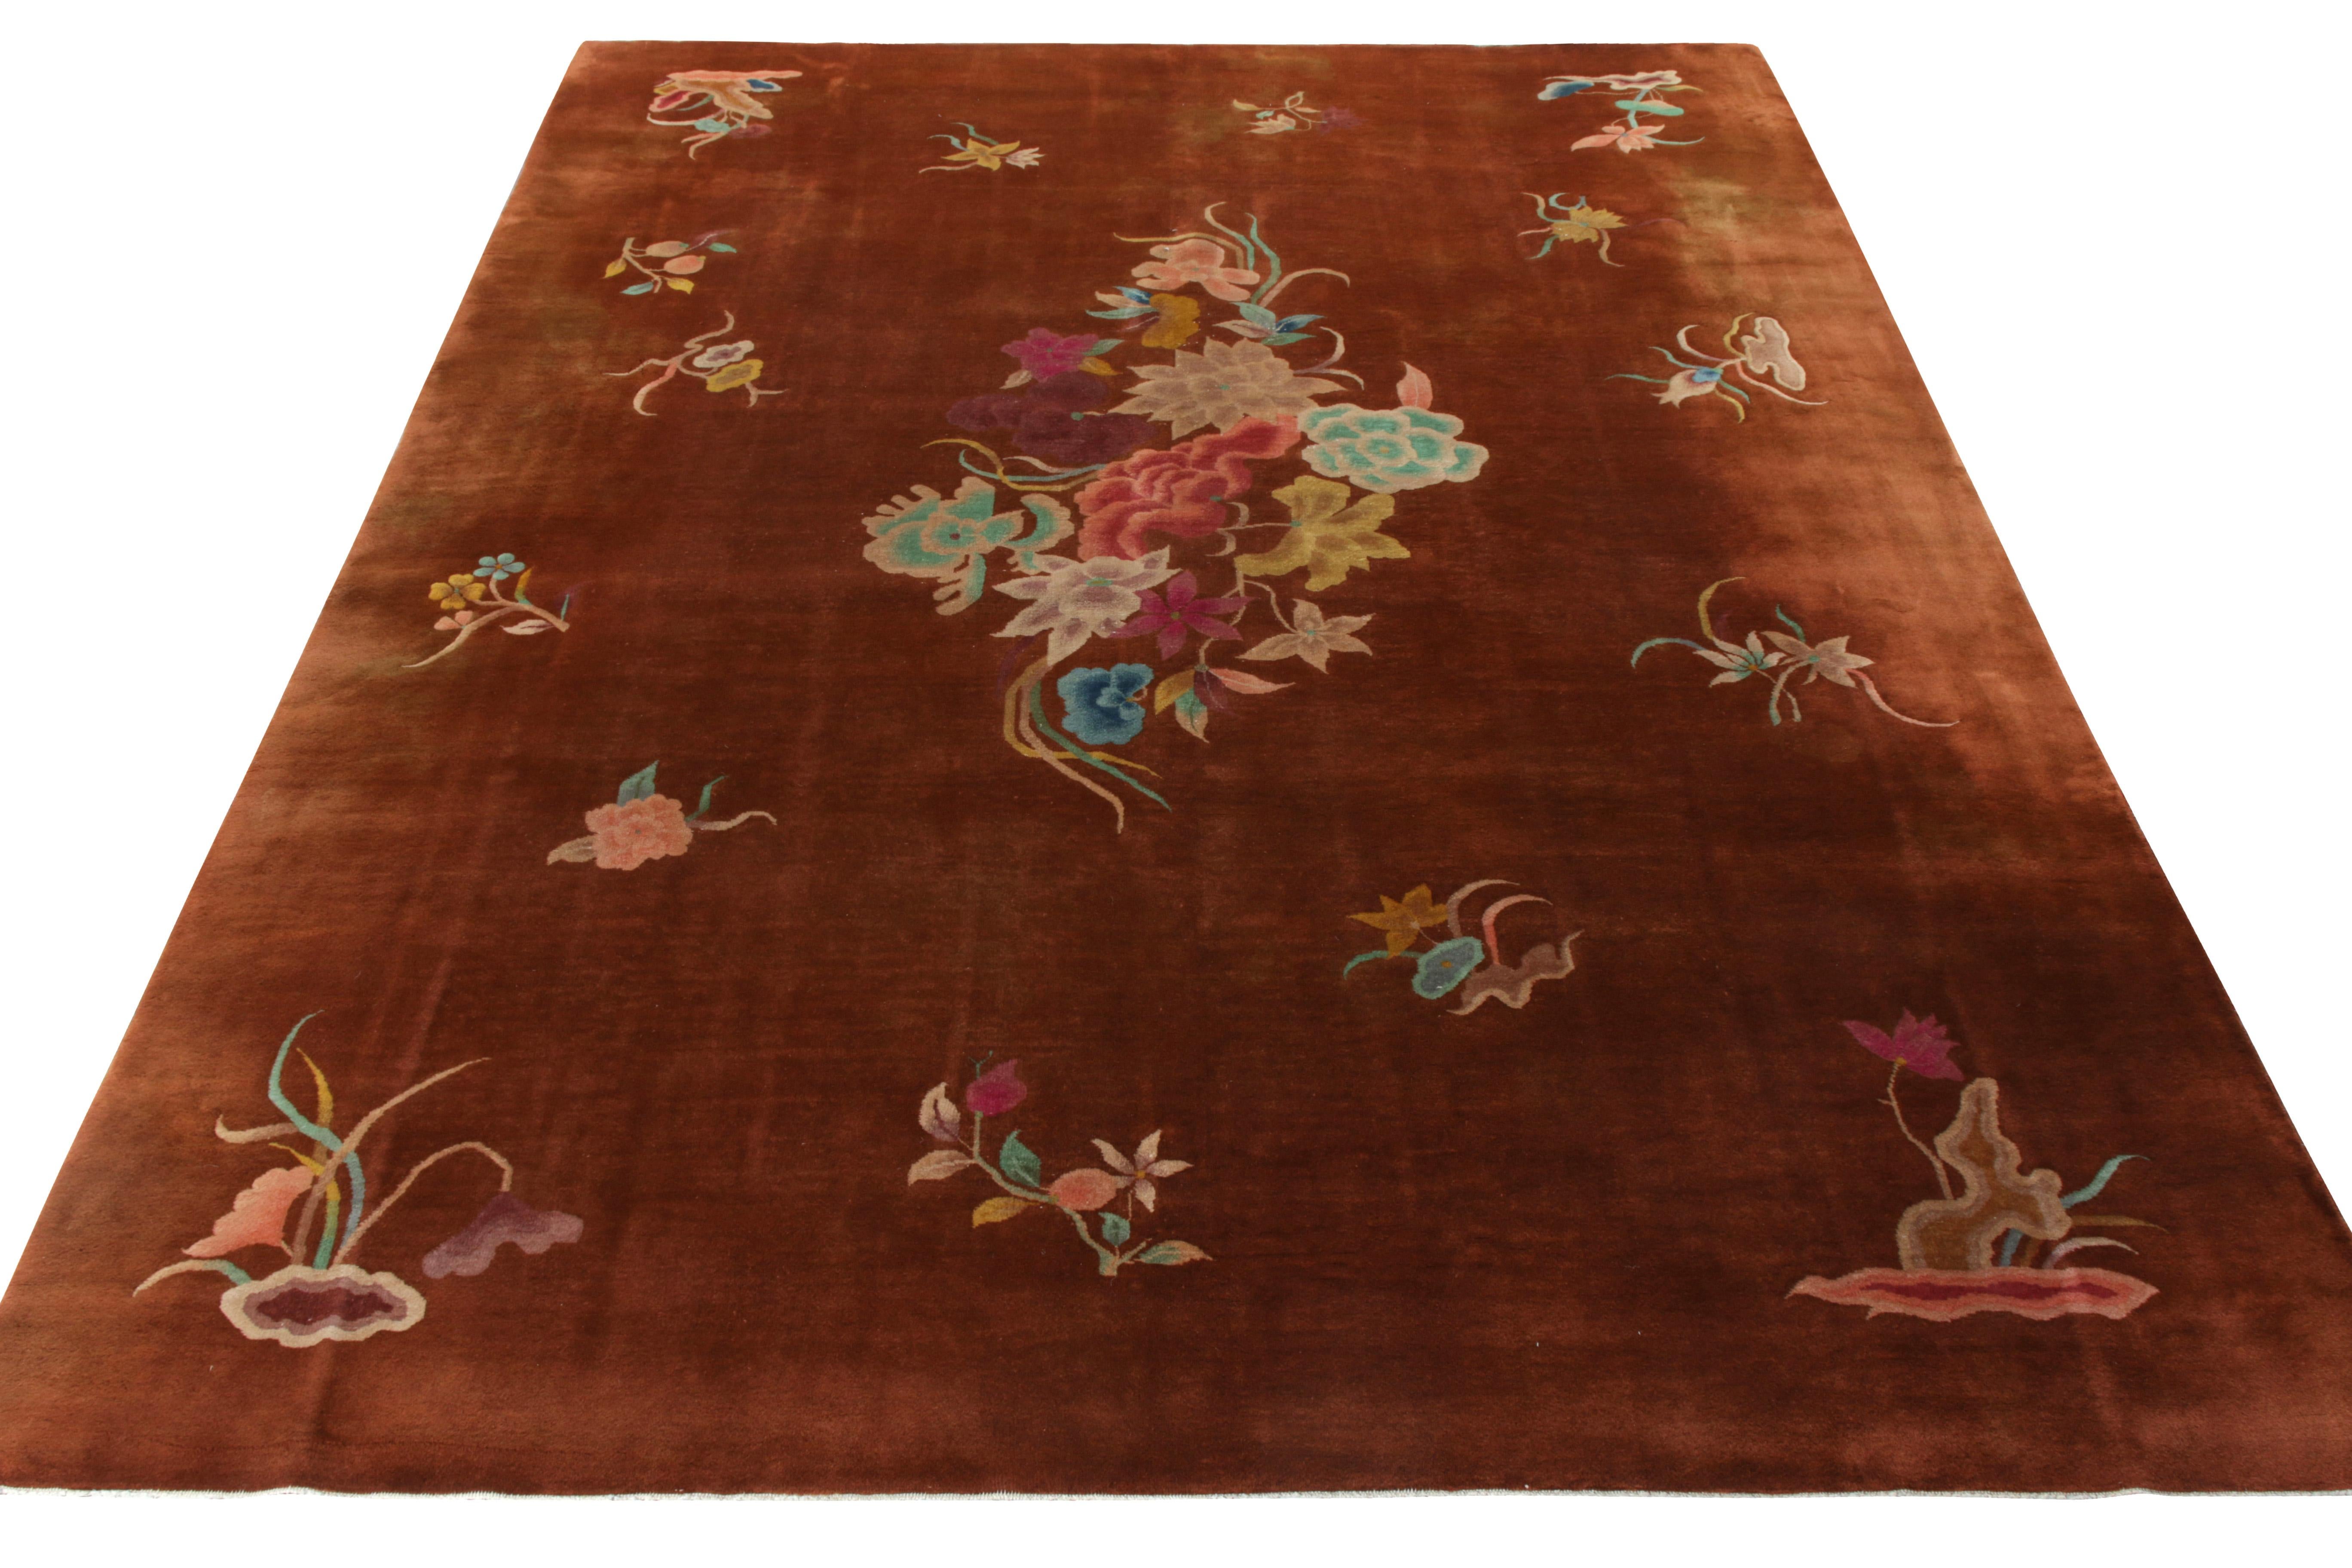 Hand knotted on a luscious 9 x 12 scale from China circa 1950-1960, this vintage Art Deco rug hails from Rug & Kilim’s coveted Antique & Vintage Collection. Reflecting a more mid-century take on 1920s style, the rug embraces an elegant floral